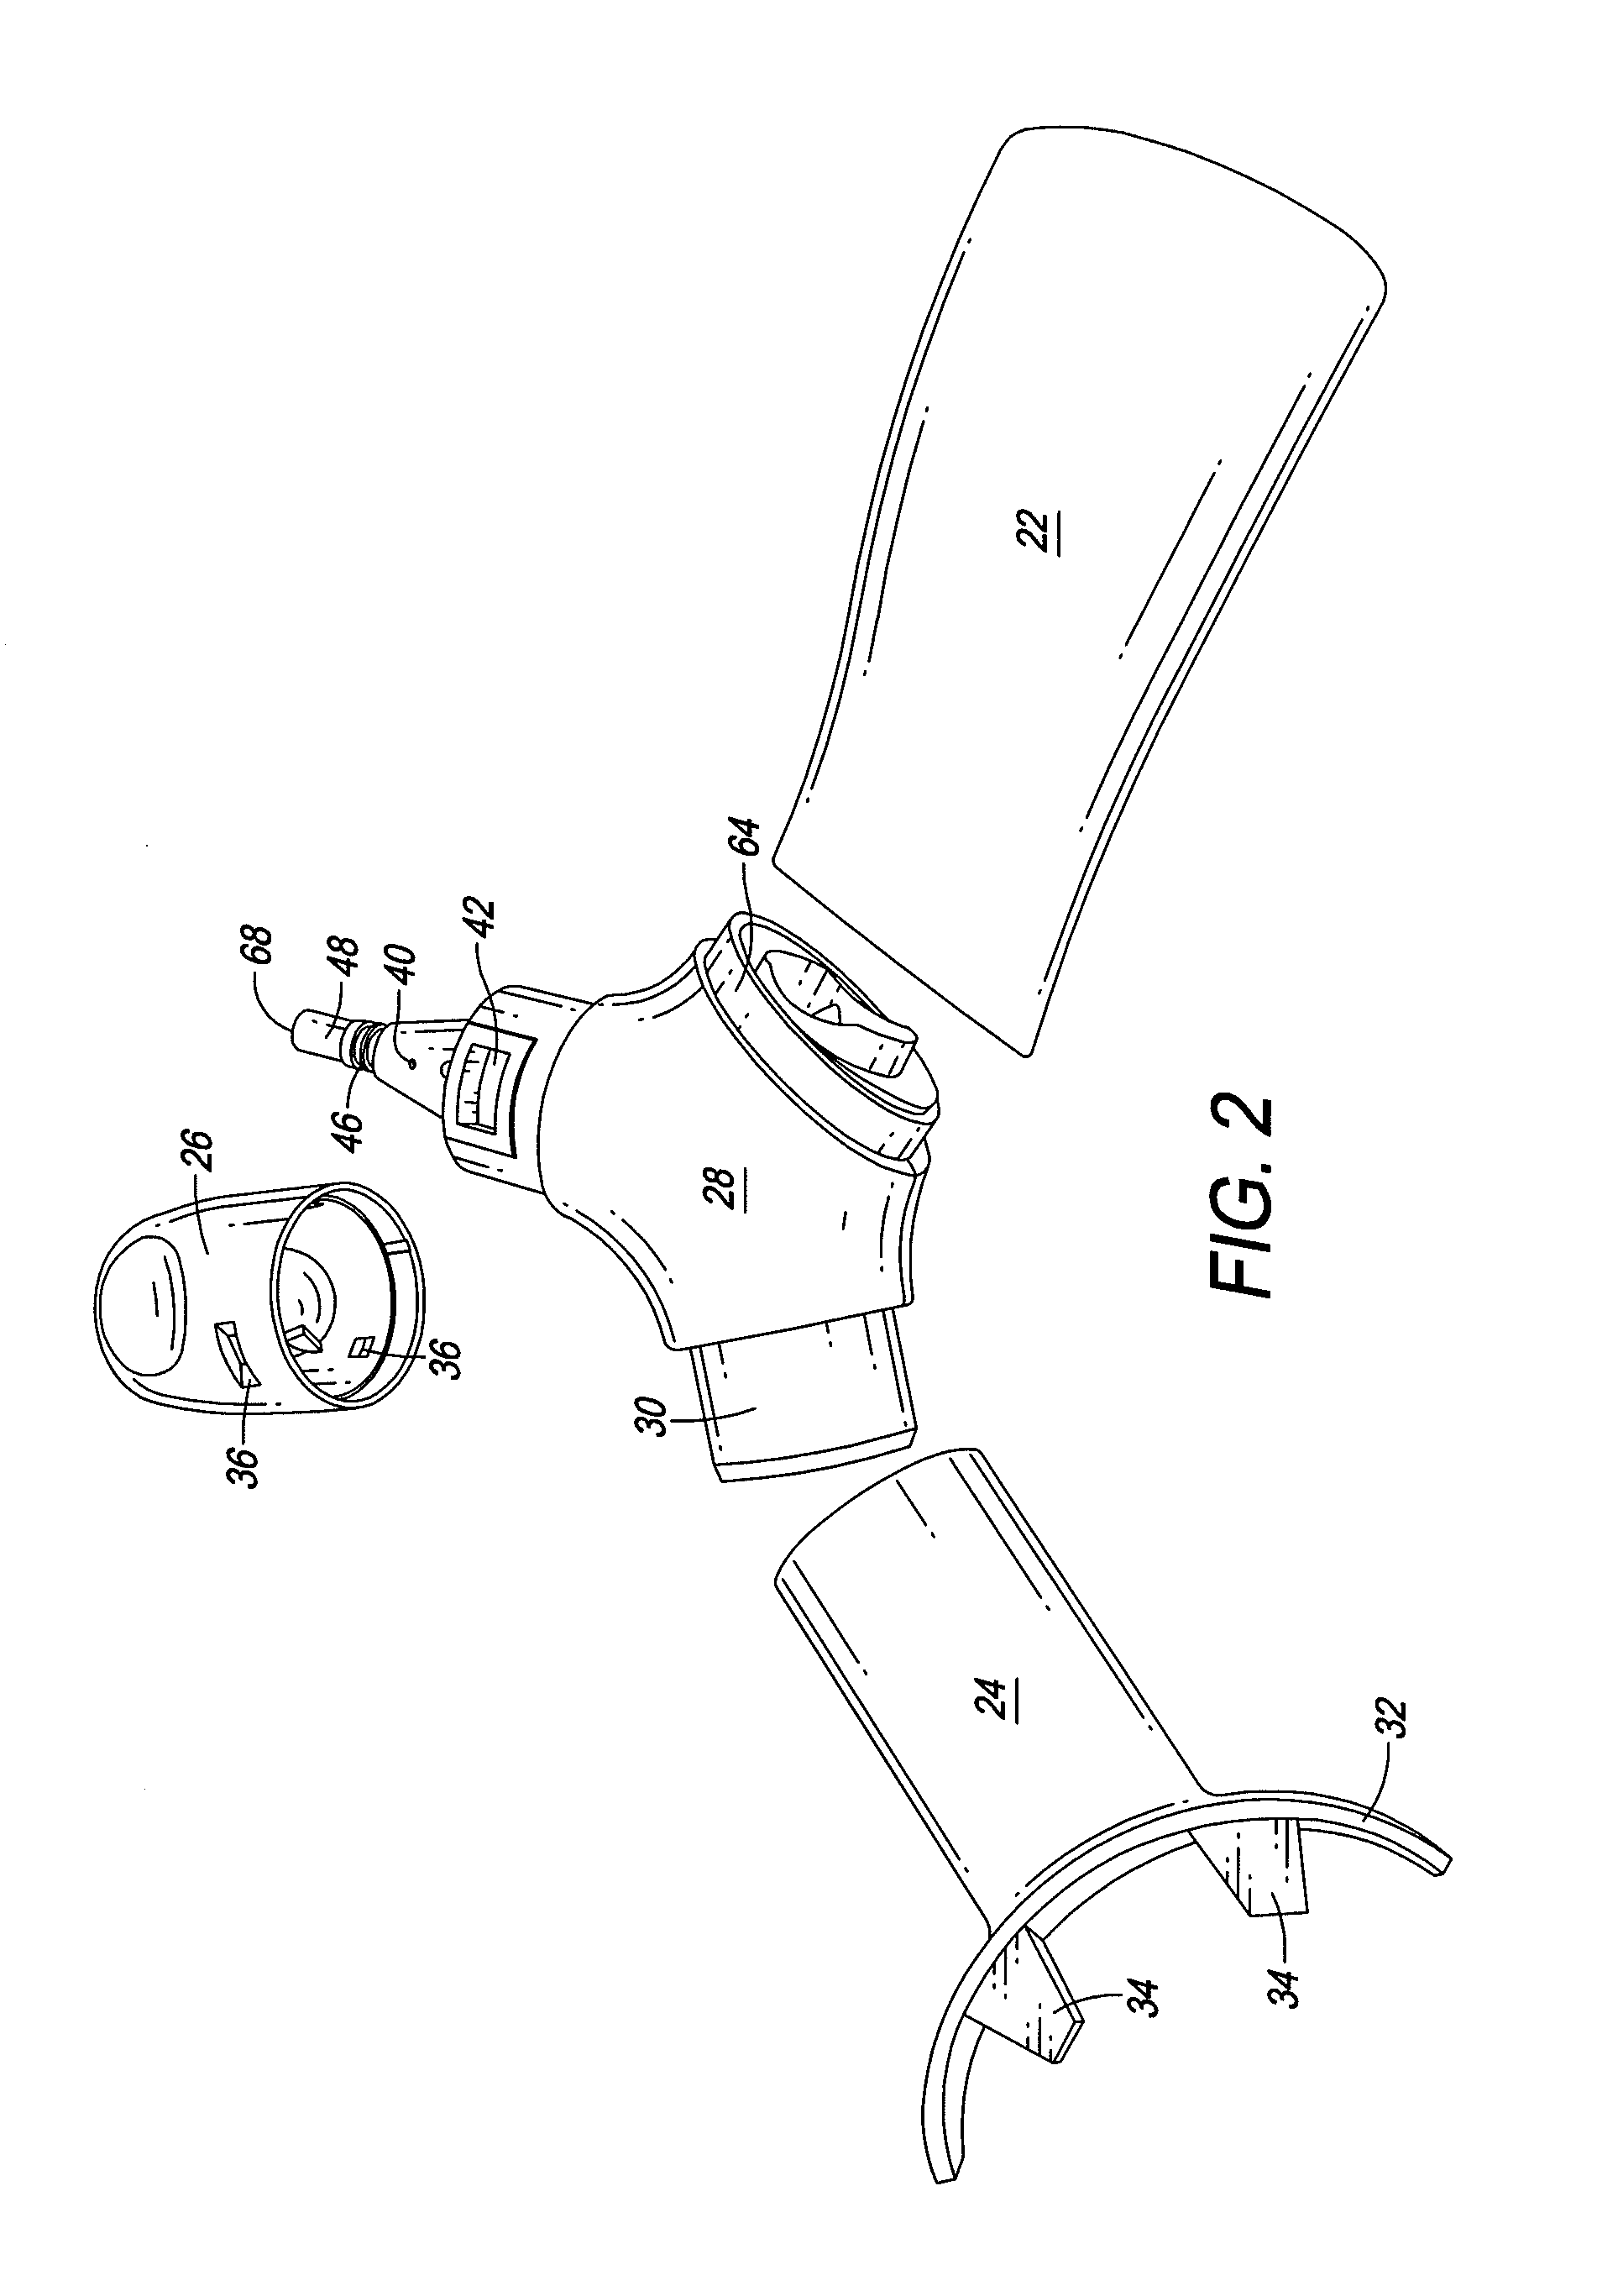 System and method for improving endurance of inspiratory muscles